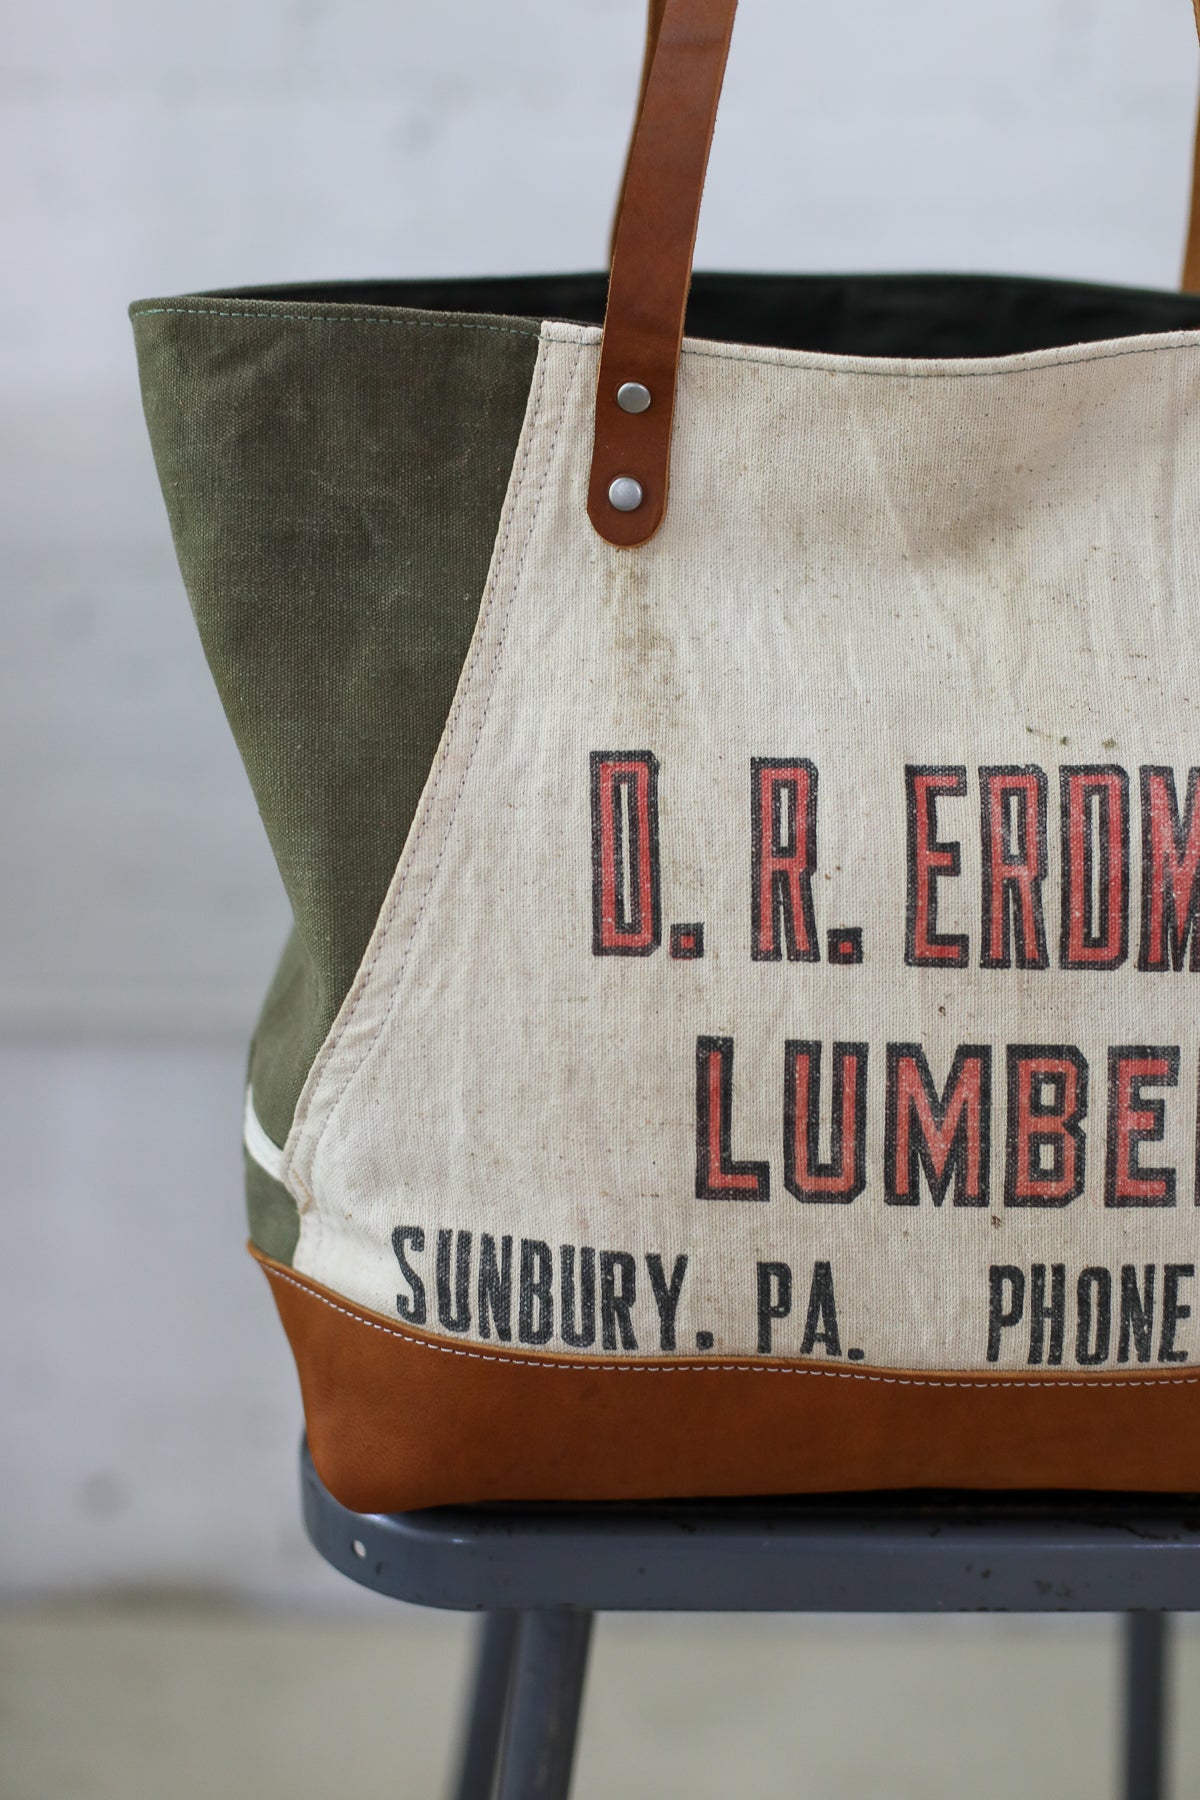 WWII era Salvaged Canvas and Work Apron Tote Bag